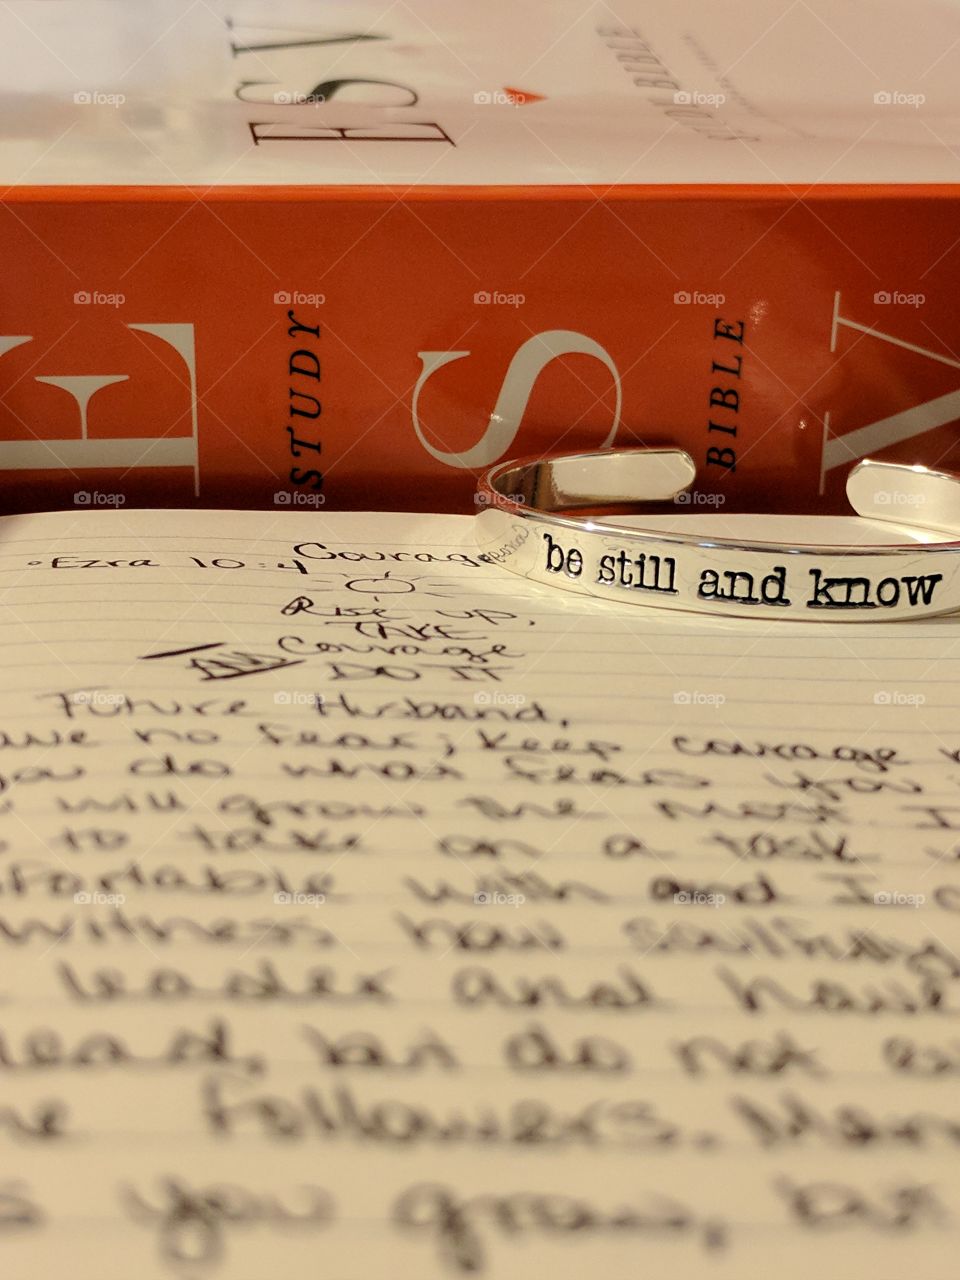 silver cuff bracelet
typewriter font
handwritten letter to 
a dear future husband
in which I do not know
but am excited to meet...
P.S. I love you,
Your girl.